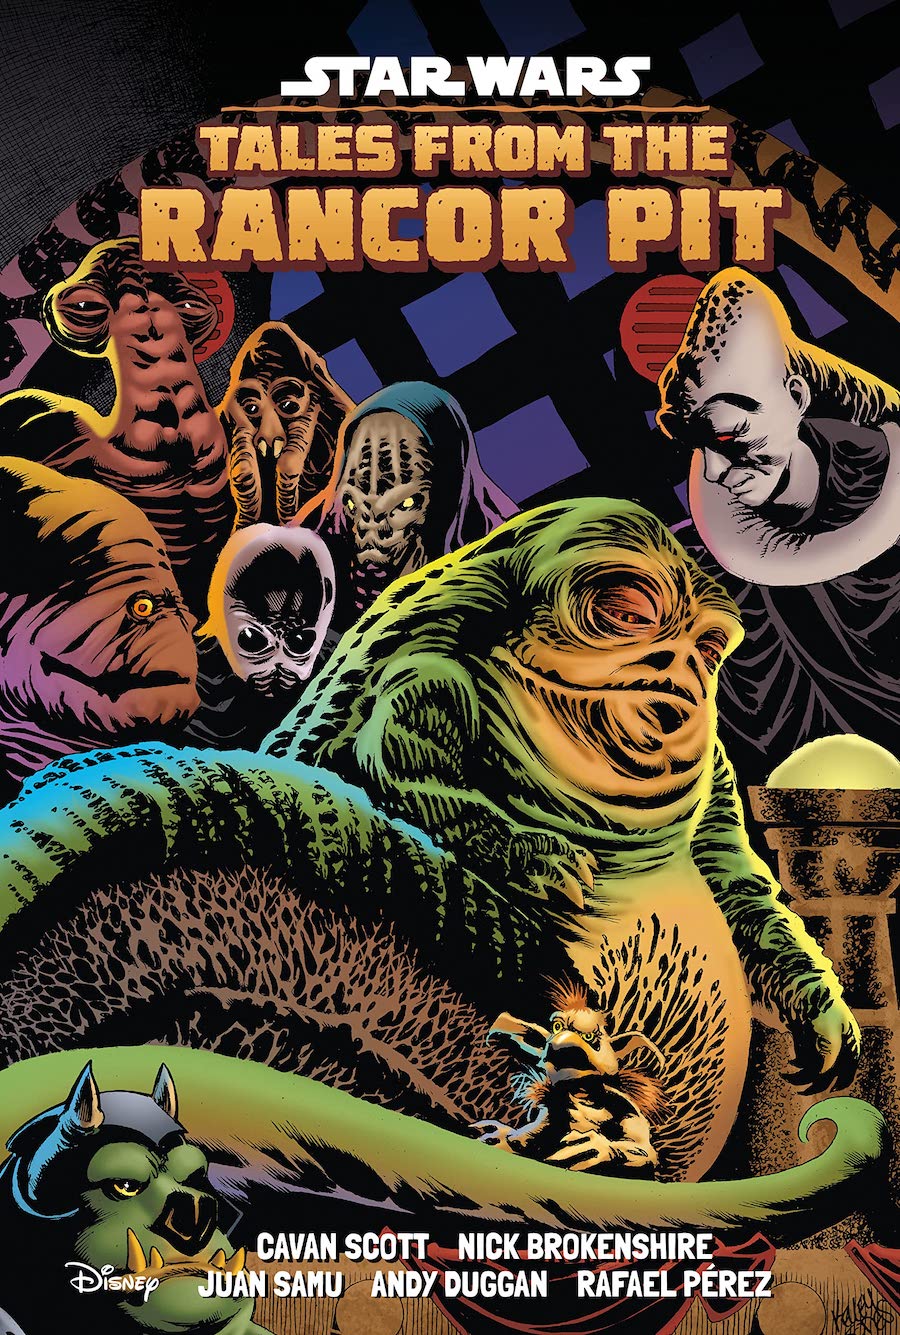 Cover of Star Wars: Tales from the Rancor Pit